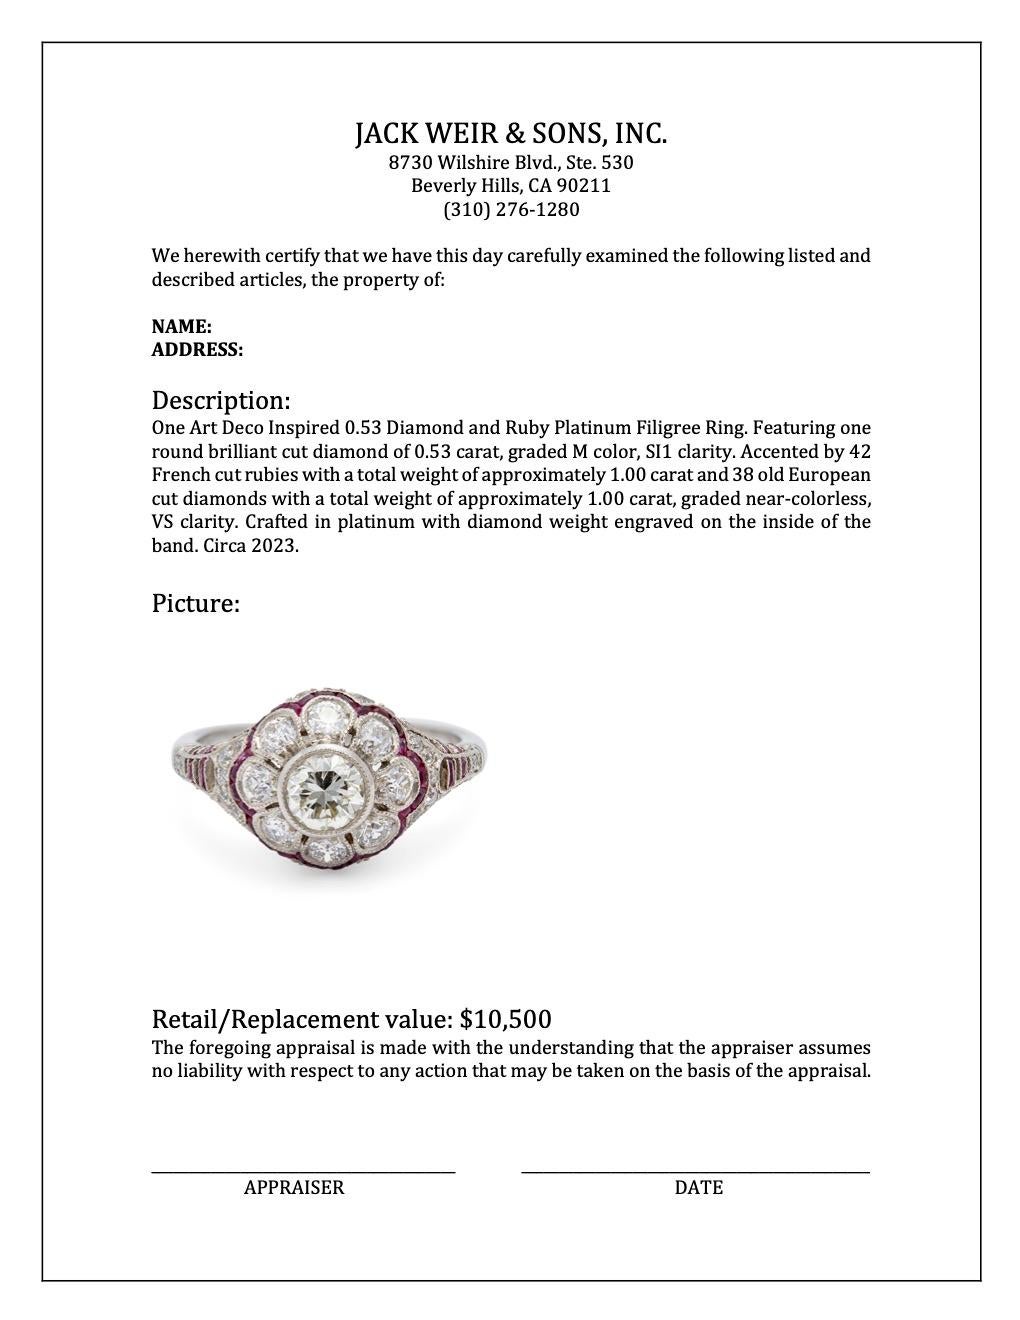 Art Deco Inspired 0.53 Diamond and Ruby Platinum Filigree Ring For Sale 2